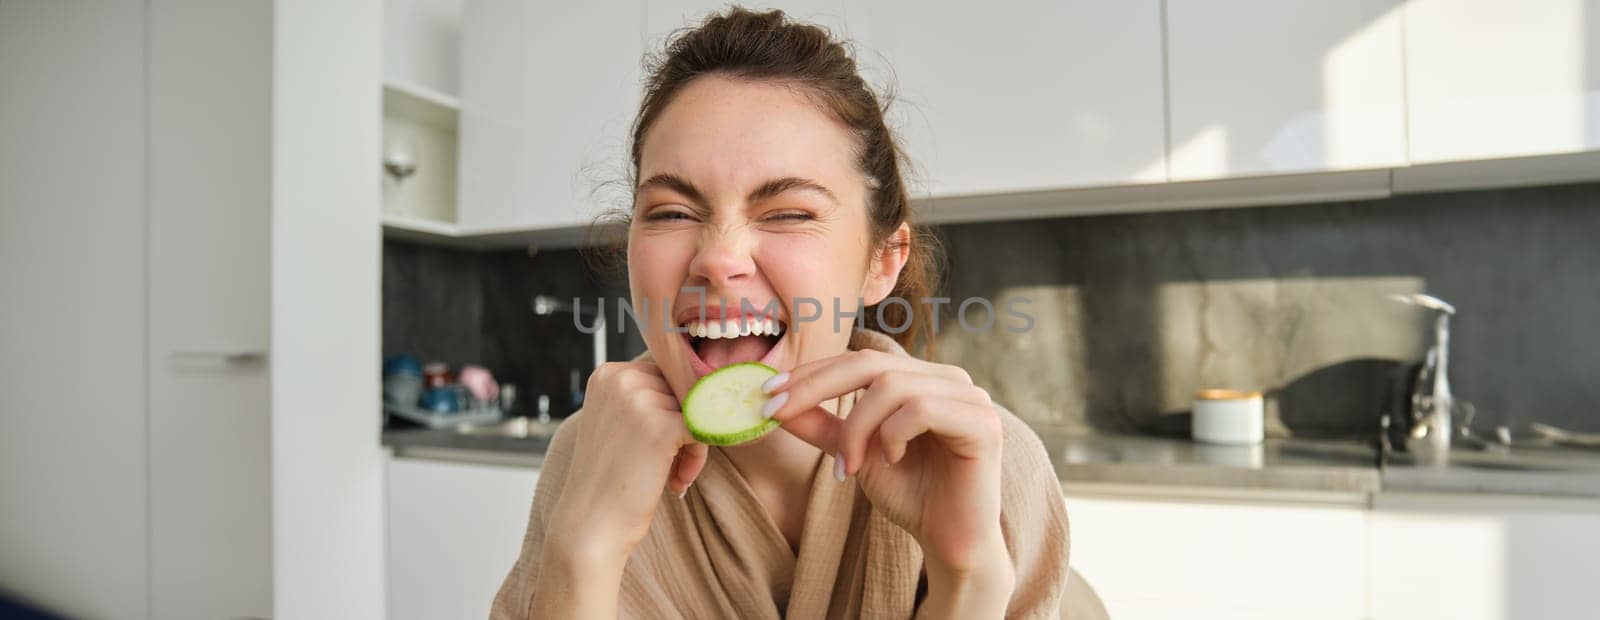 Portrait of happy, smiling young woman in the kitchen, cooking, chopping zucchini, holding vegetables and looking happy, preparing vegan food meal at home.